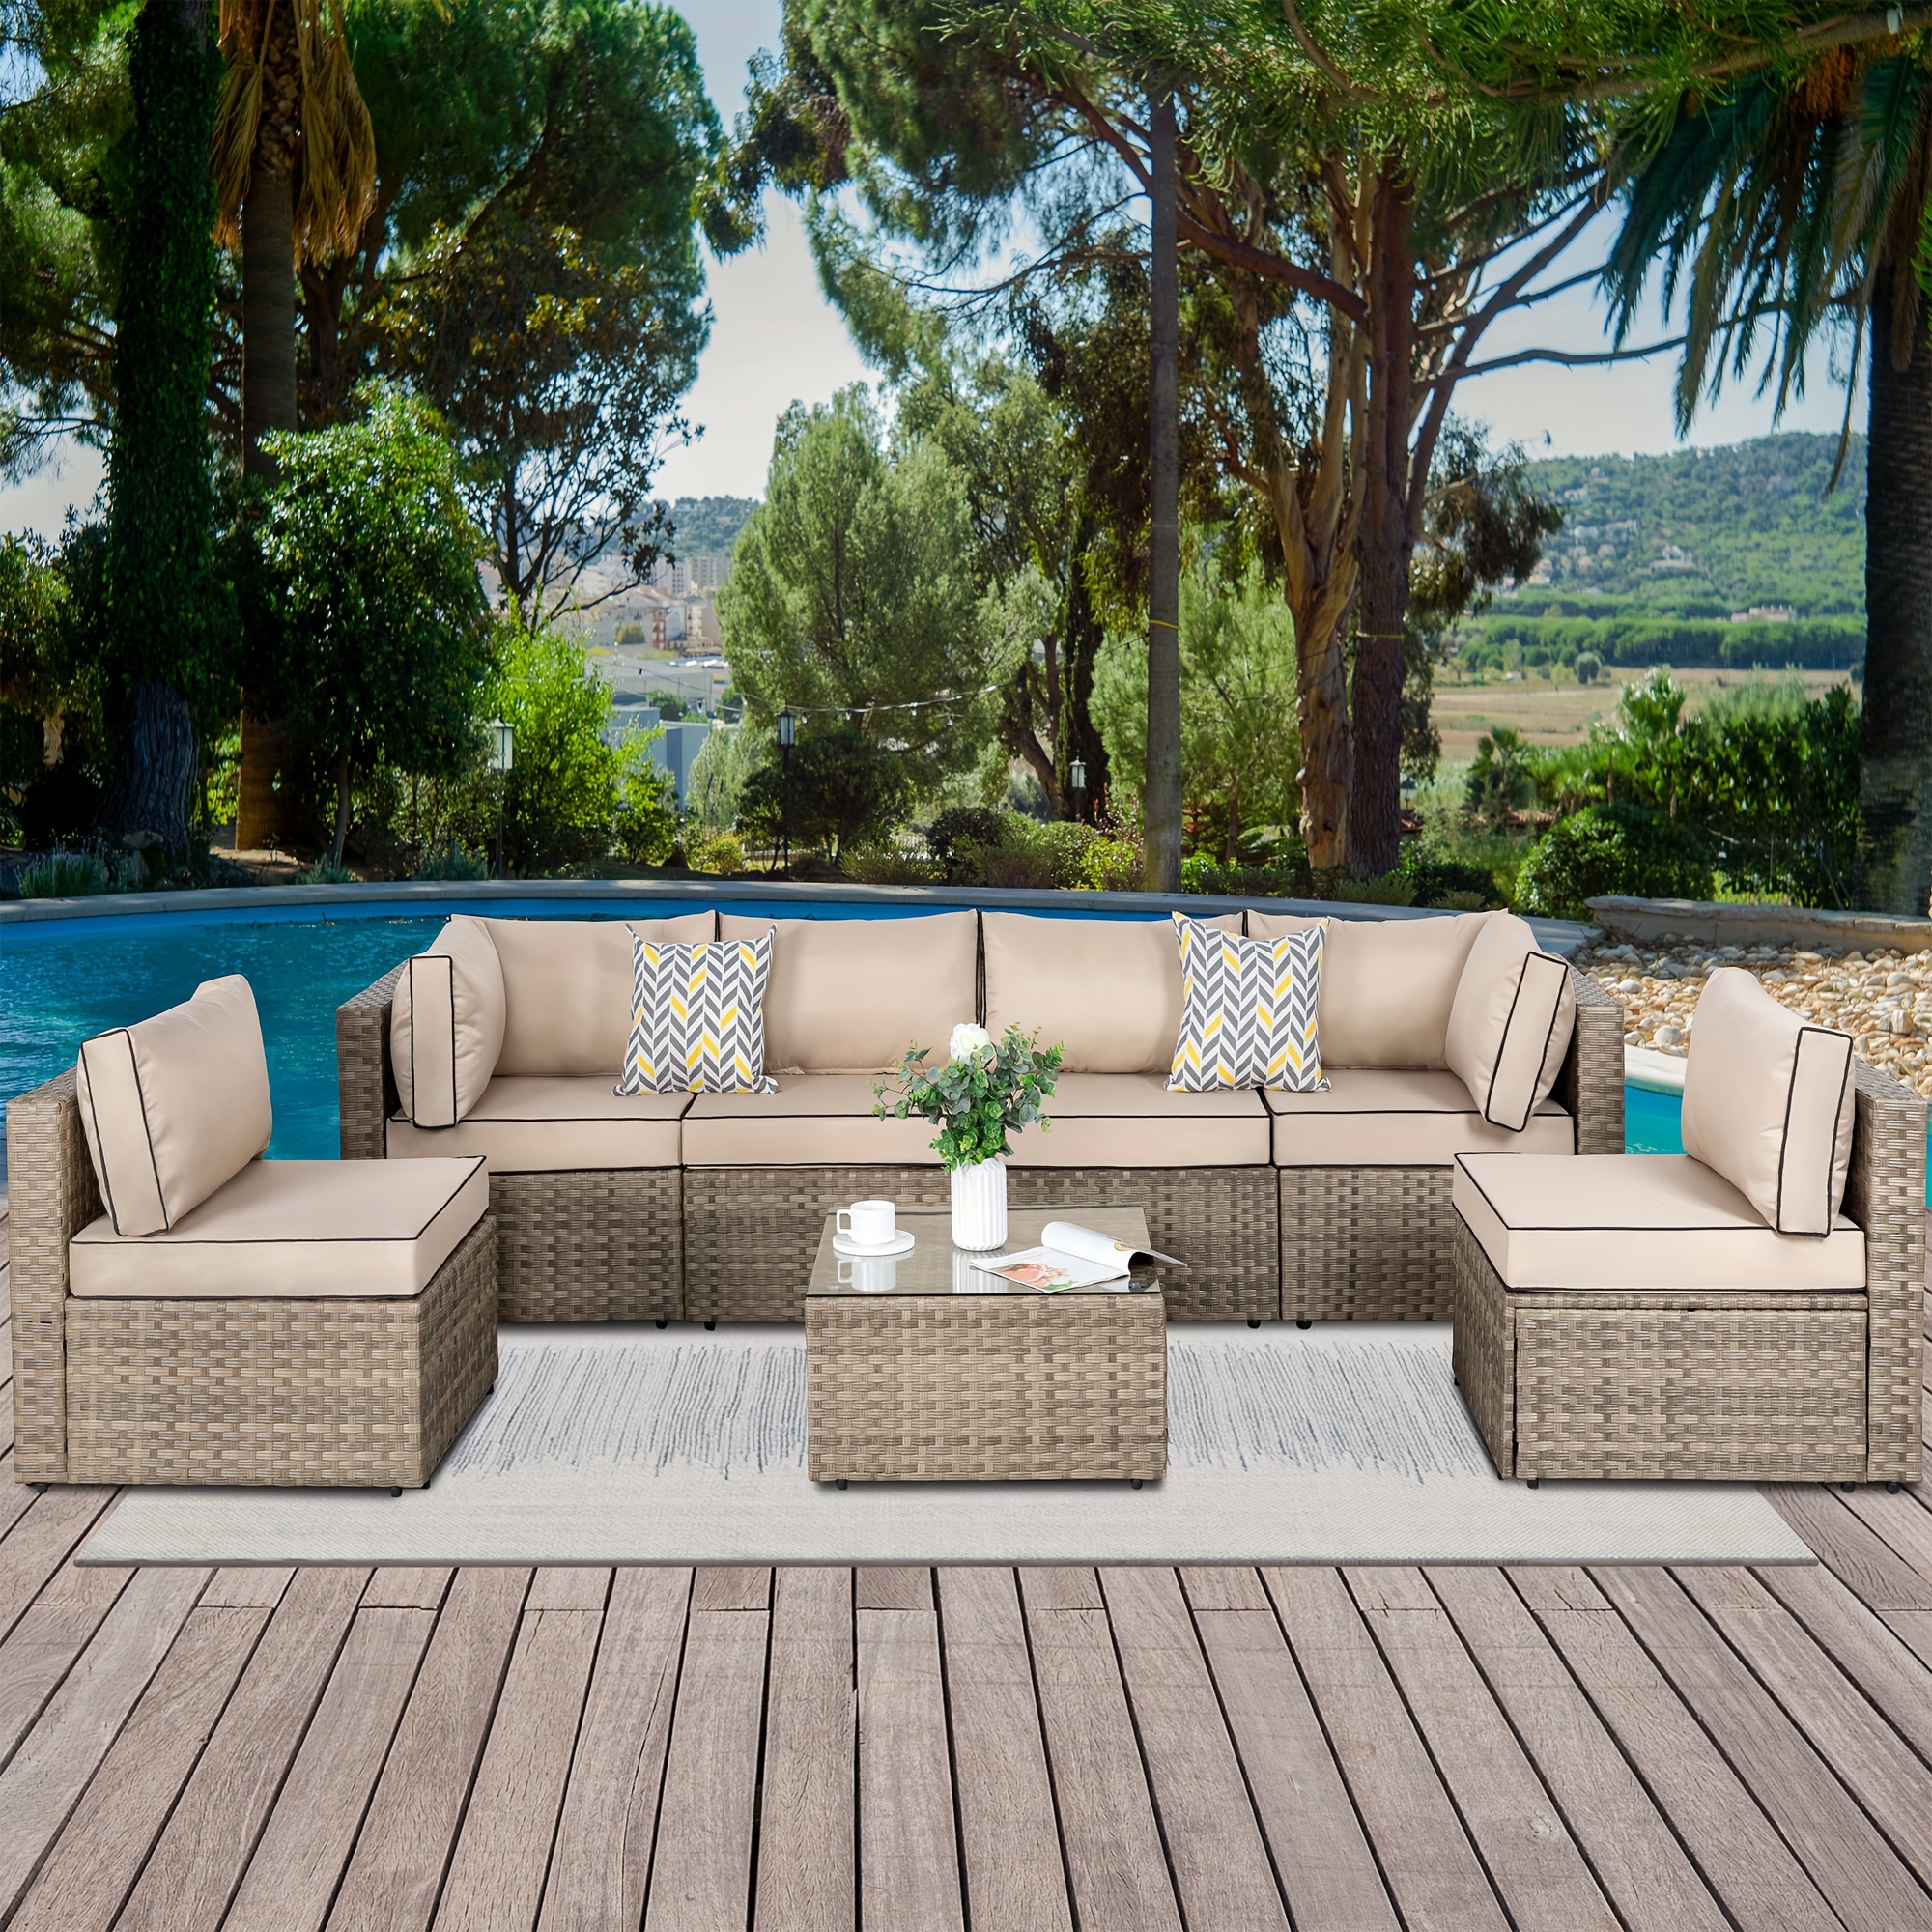 

Jamfly 7 Piece Outdoor Patio Furniture Sets, Pe Rattan Wicker Sectional Patio Sofa Couch With Tea Table & Washable Cushions